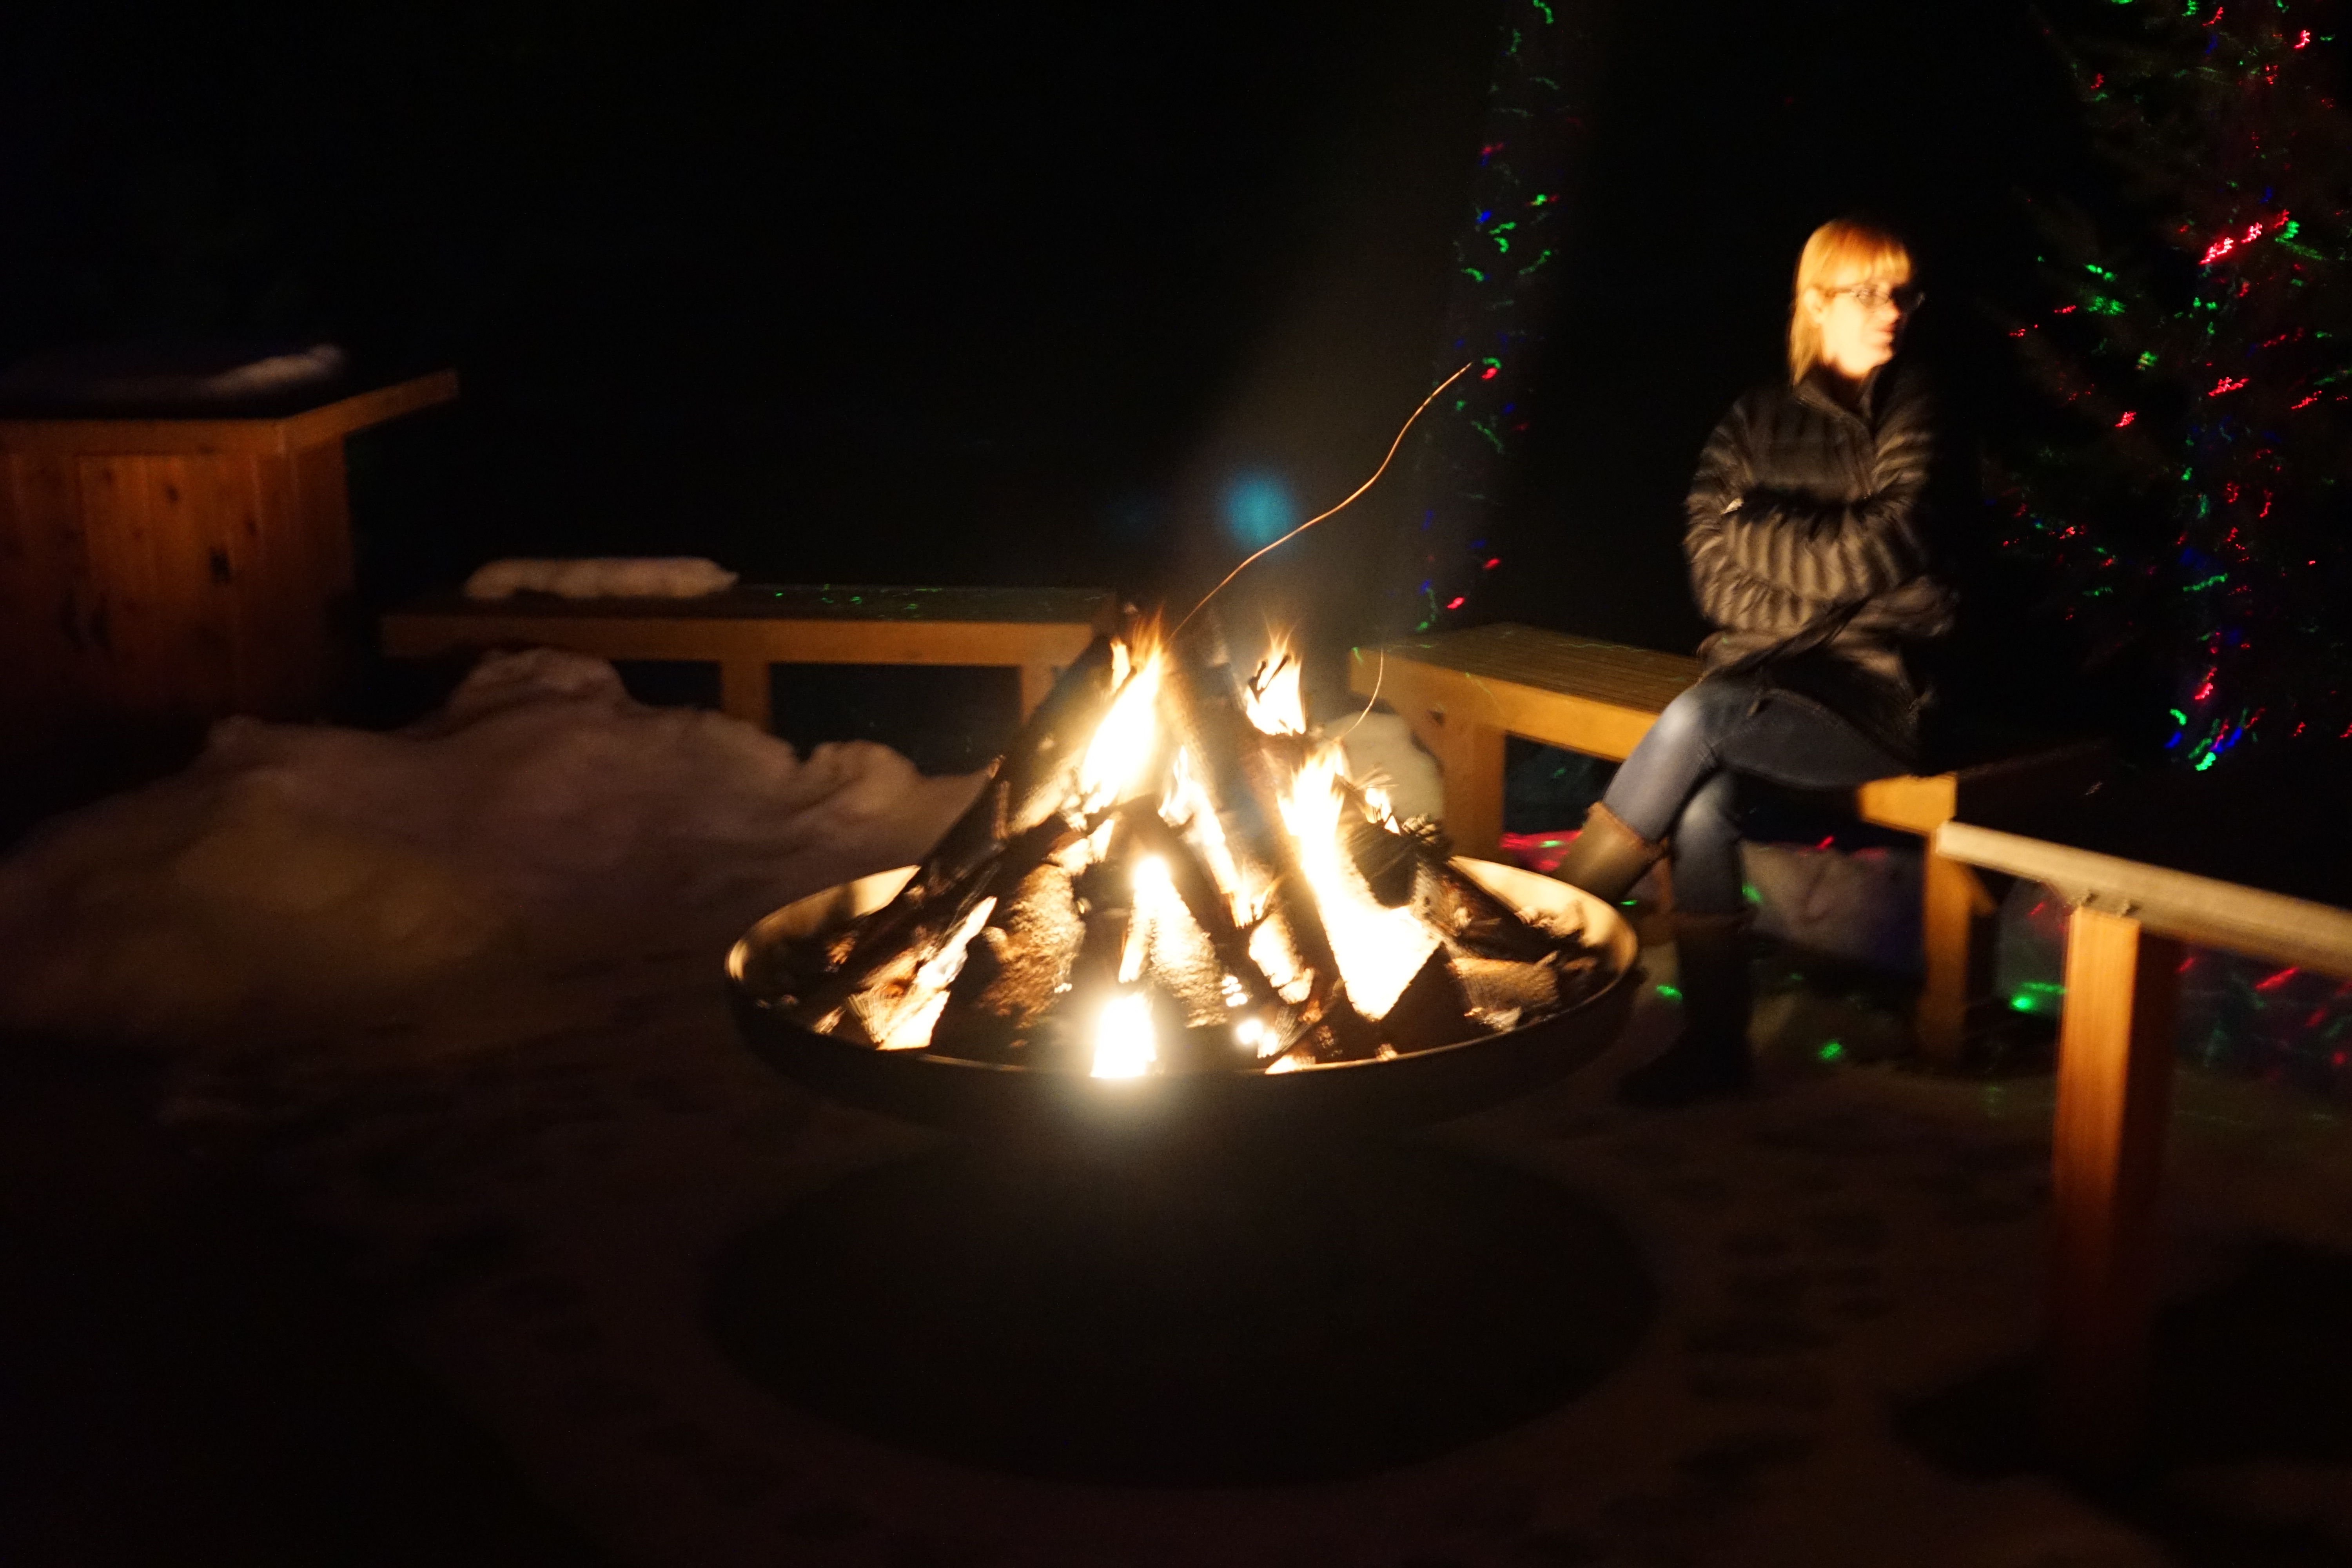 grand river lodge- enjoying the fire and lights